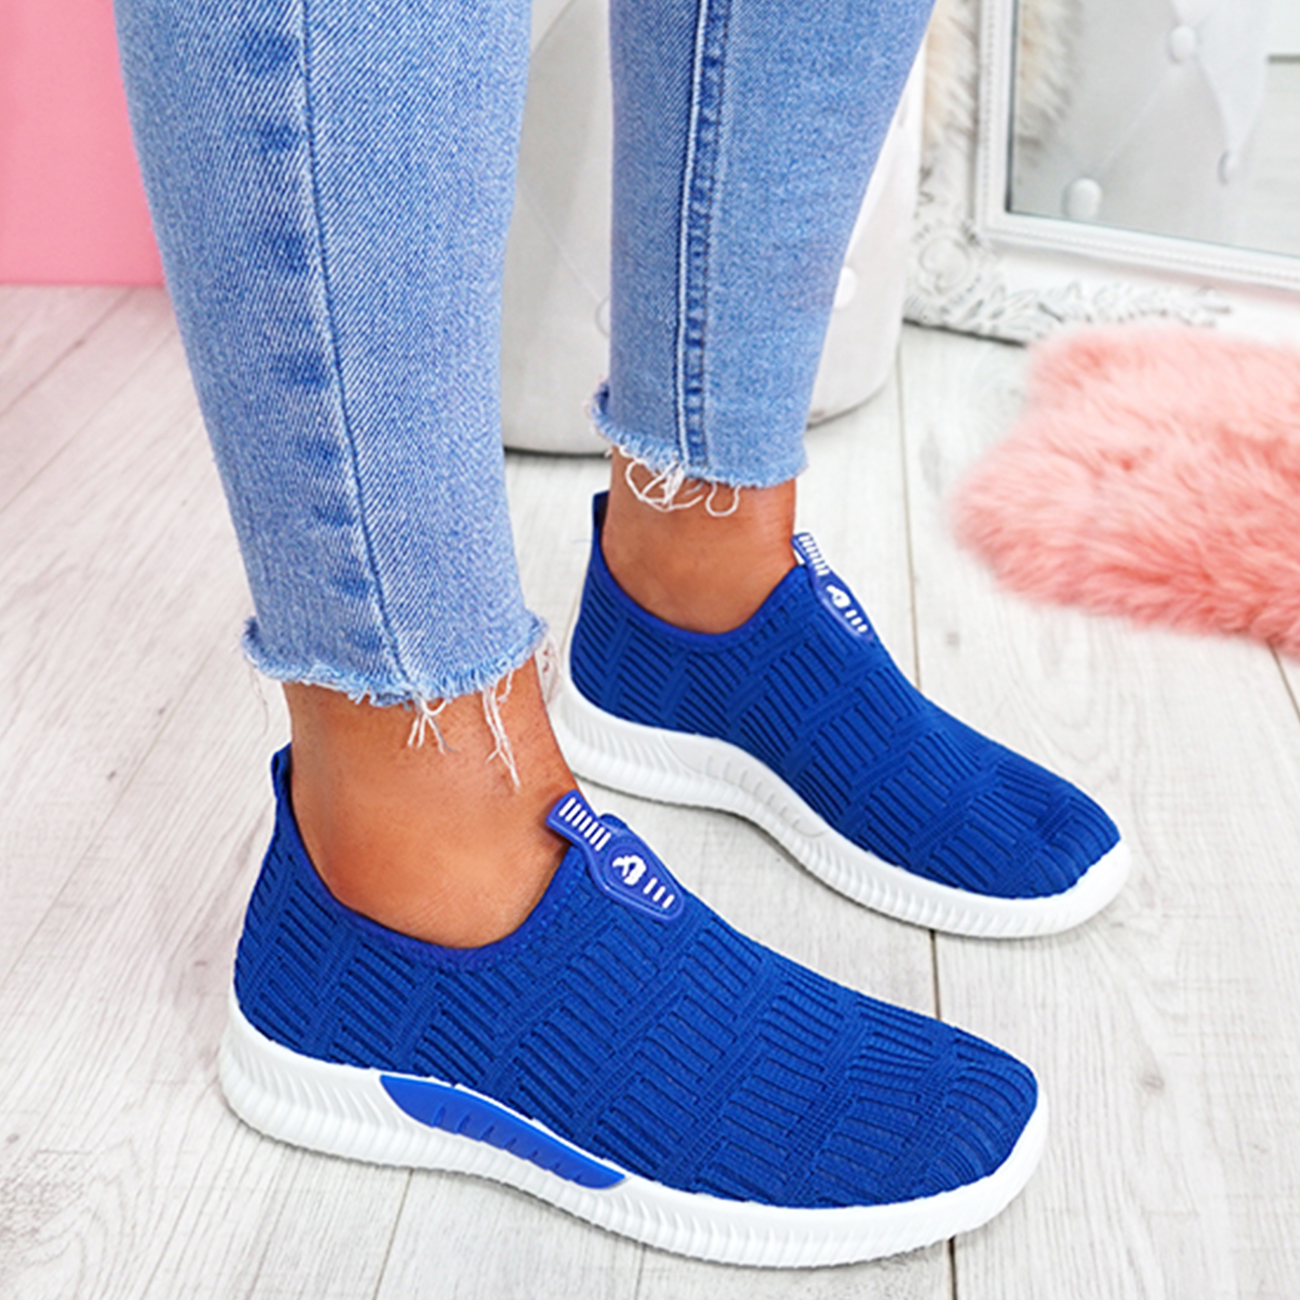 iDental Comfy - Elegant Orthopedic & Extremely Soft Shoes Women Slip On  Trainers Sneakers Pumps Ladies Breathable Comfy Loafers Blue 8